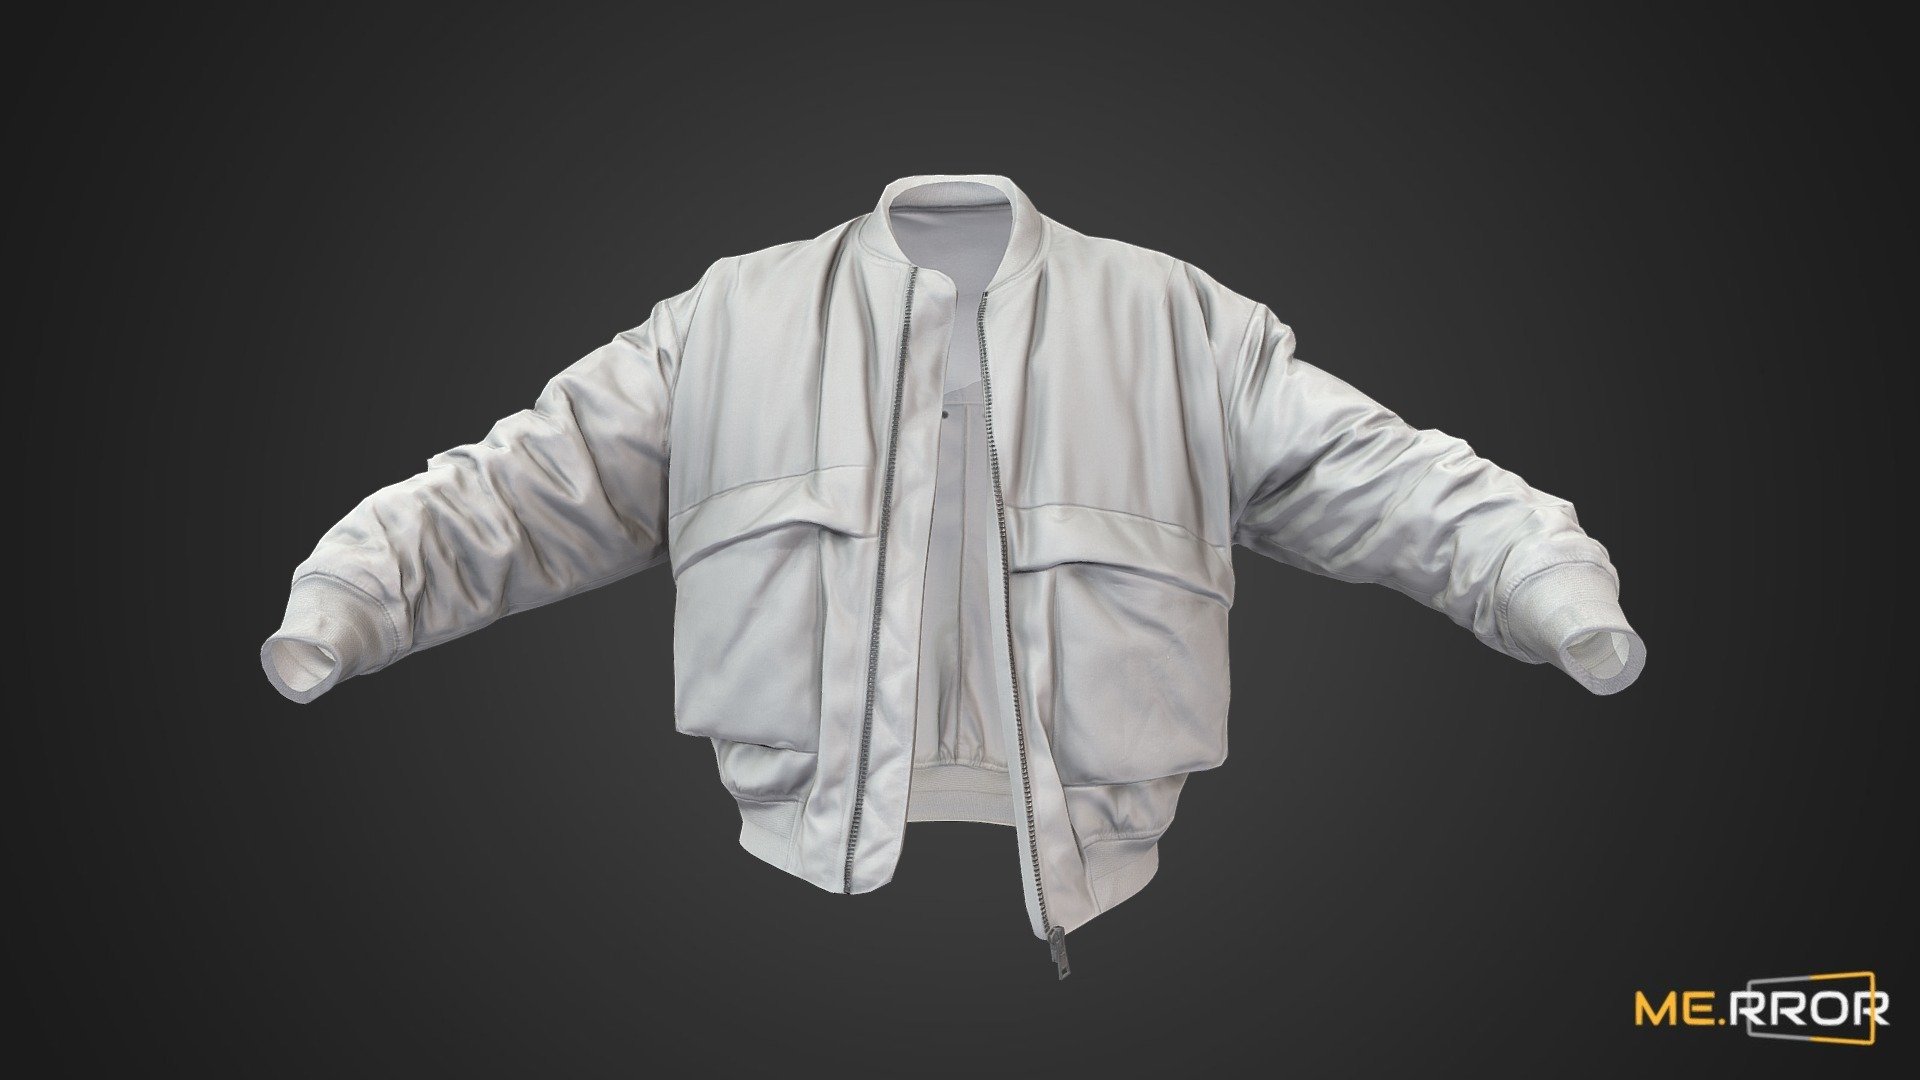 MERROR is a 3D Content PLATFORM which introduces various Asian assets to the 3D world


3DScanning #Photogrametry #ME.RROR - [Game-Ready] Light gray Jumper - Buy Royalty Free 3D model by ME.RROR Studio (@merror) 3d model